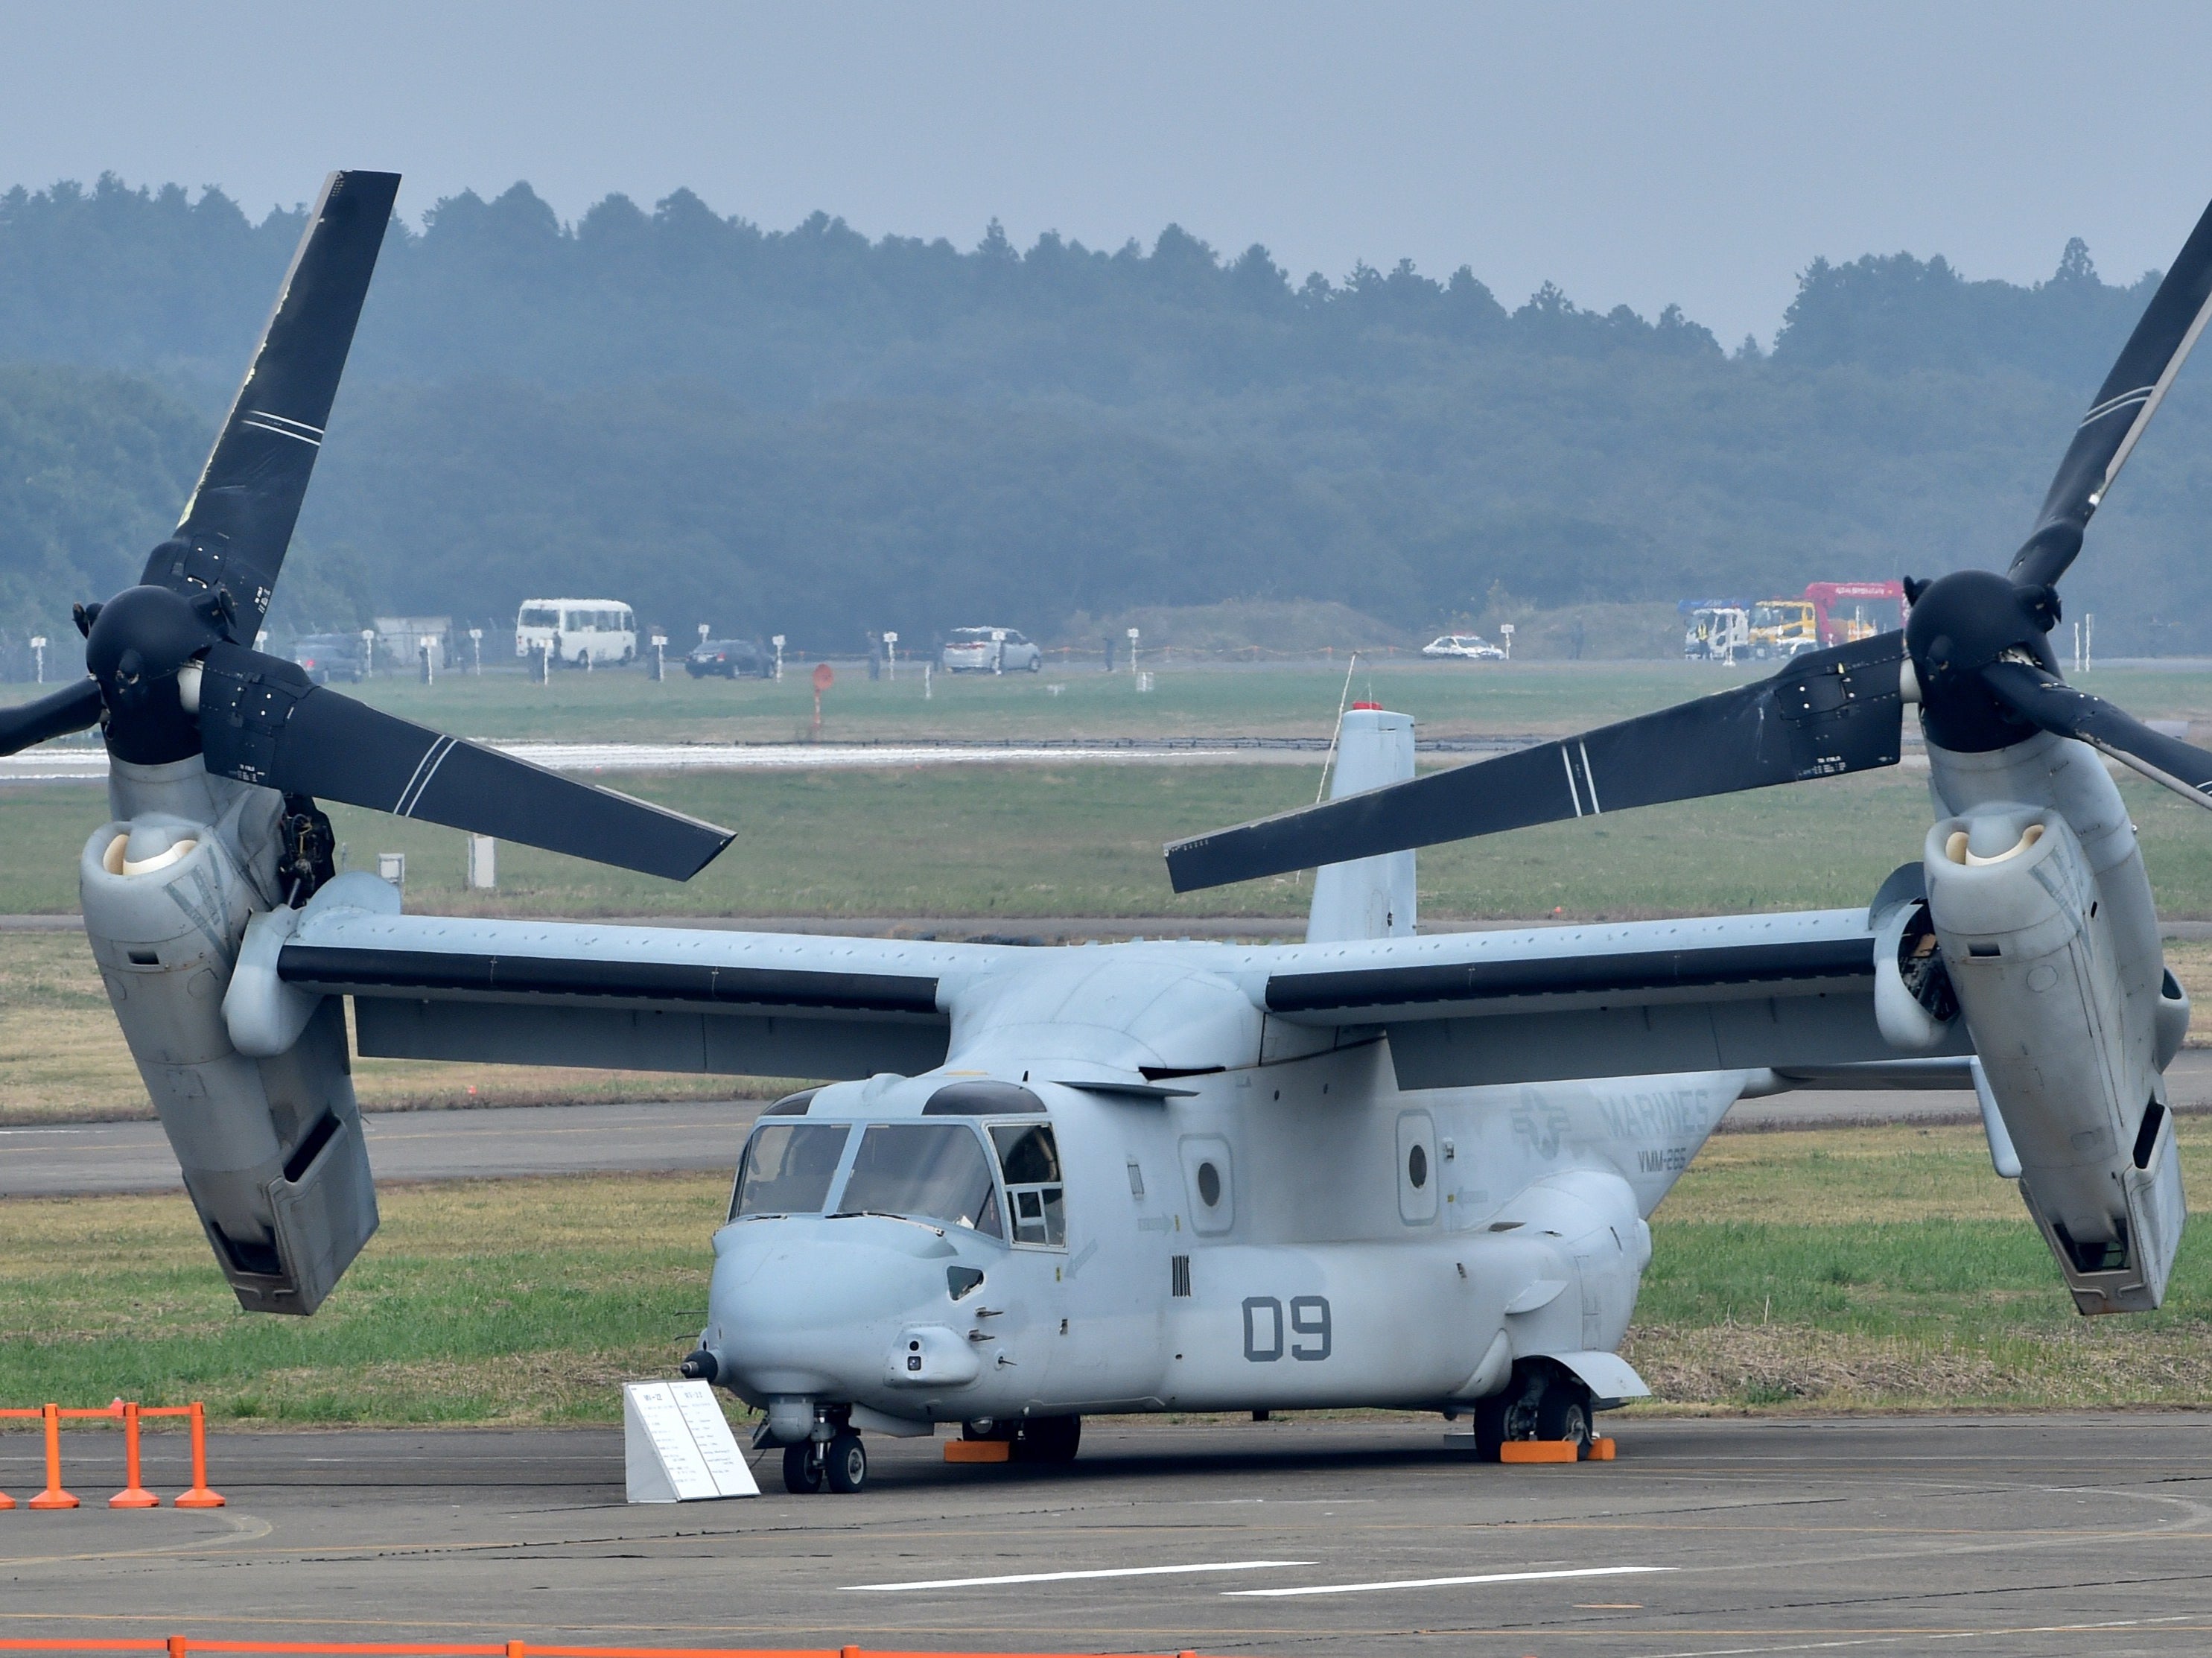 This file photo from 2014 shows a US Marine Corps Osprey aircraft, similar to the one that crashed